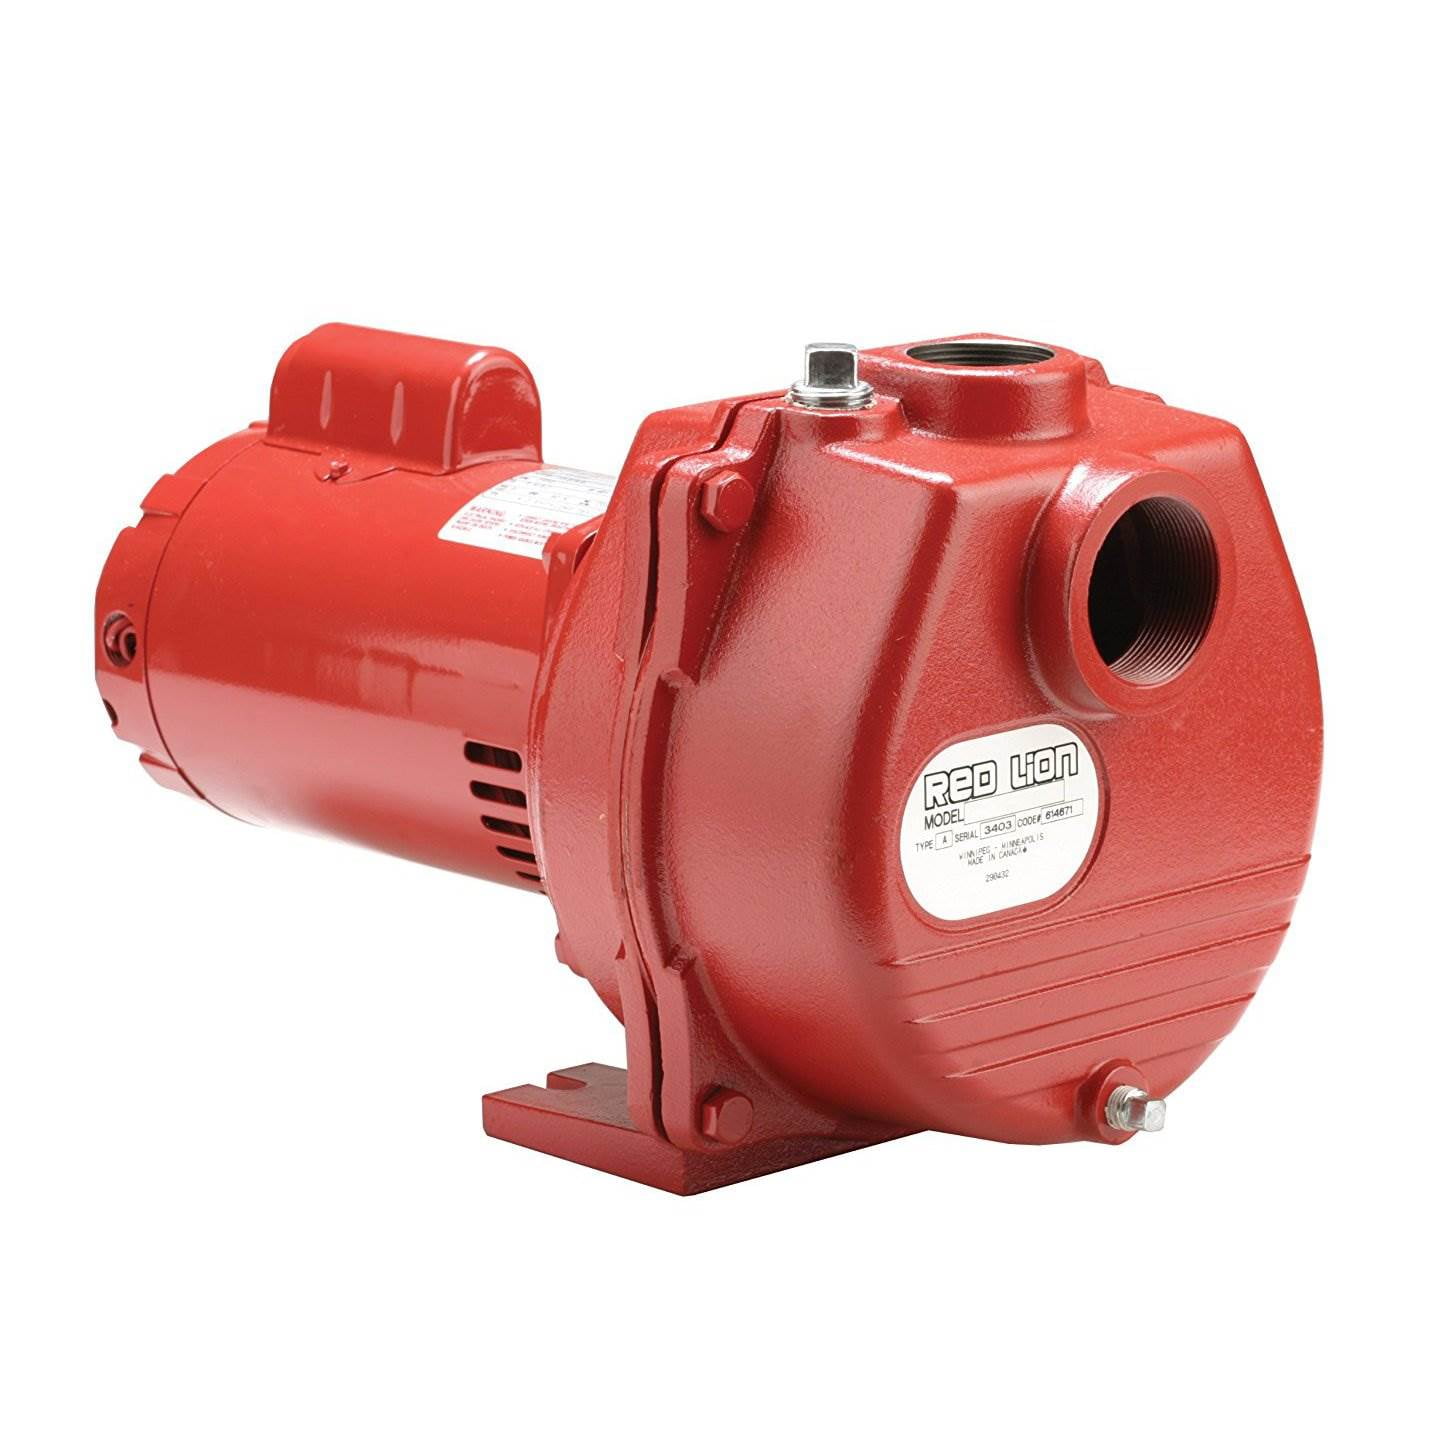 Flotec FP5172-08 1.5-HP Thermoplastic Pump for sale online